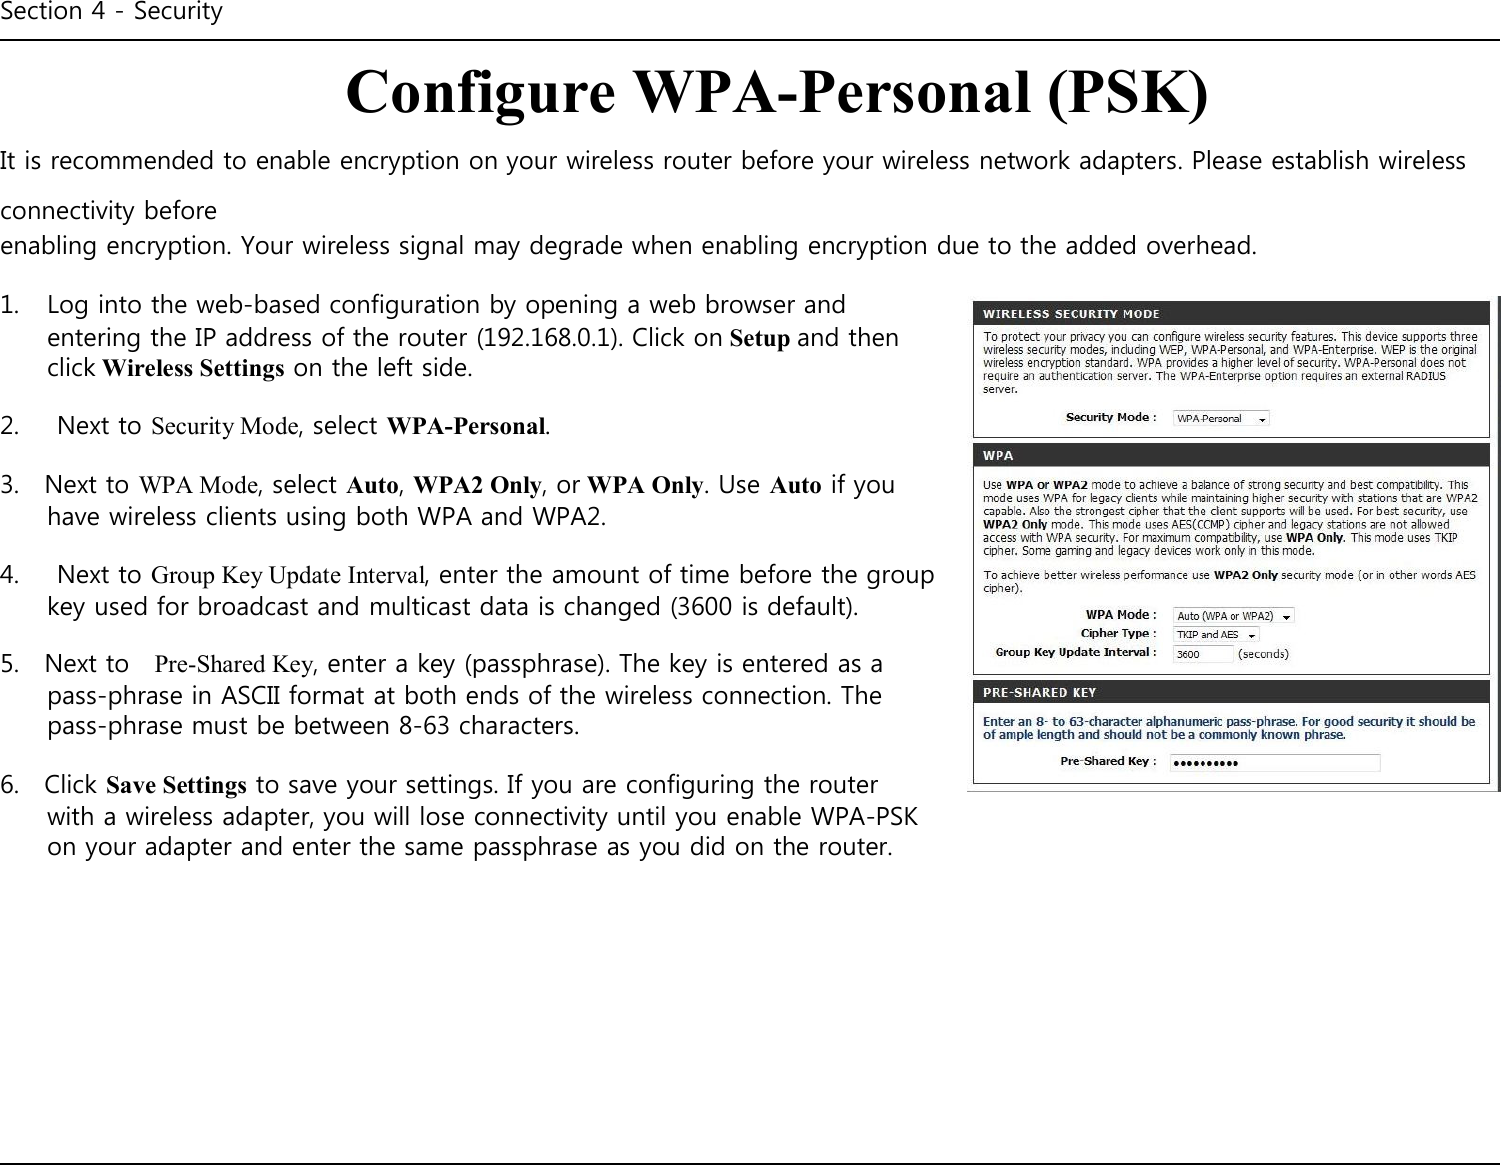 Section 4 - Security    Configure WPA-Personal (PSK) It is recommended to enable encryption on your wireless router before your wireless network adapters. Please establish wireless connectivity before enabling encryption. Your wireless signal may degrade when enabling encryption due to the added overhead.  1.  Log into the web-based configuration by opening a web browser and entering the IP address of the router (192.168.0.1). Click on Setup and then click Wireless Settings on the left side.  2.      Next to Security Mode, select WPA-Personal.  3.    Next to WPA Mode, select Auto, WPA2 Only, or WPA Only. Use Auto if you have wireless clients using both WPA and WPA2.  4.      Next to Group Key Update Interval, enter the amount of time before the group key used for broadcast and multicast data is changed (3600 is default).  5.    Next to    Pre-Shared Key, enter a key (passphrase). The key is entered as a pass-phrase in ASCII format at both ends of the wireless connection. The pass-phrase must be between 8-63 characters.  6.    Click Save Settings to save your settings. If you are configuring the router with a wireless adapter, you will lose connectivity until you enable WPA-PSK on your adapter and enter the same passphrase as you did on the router.                  